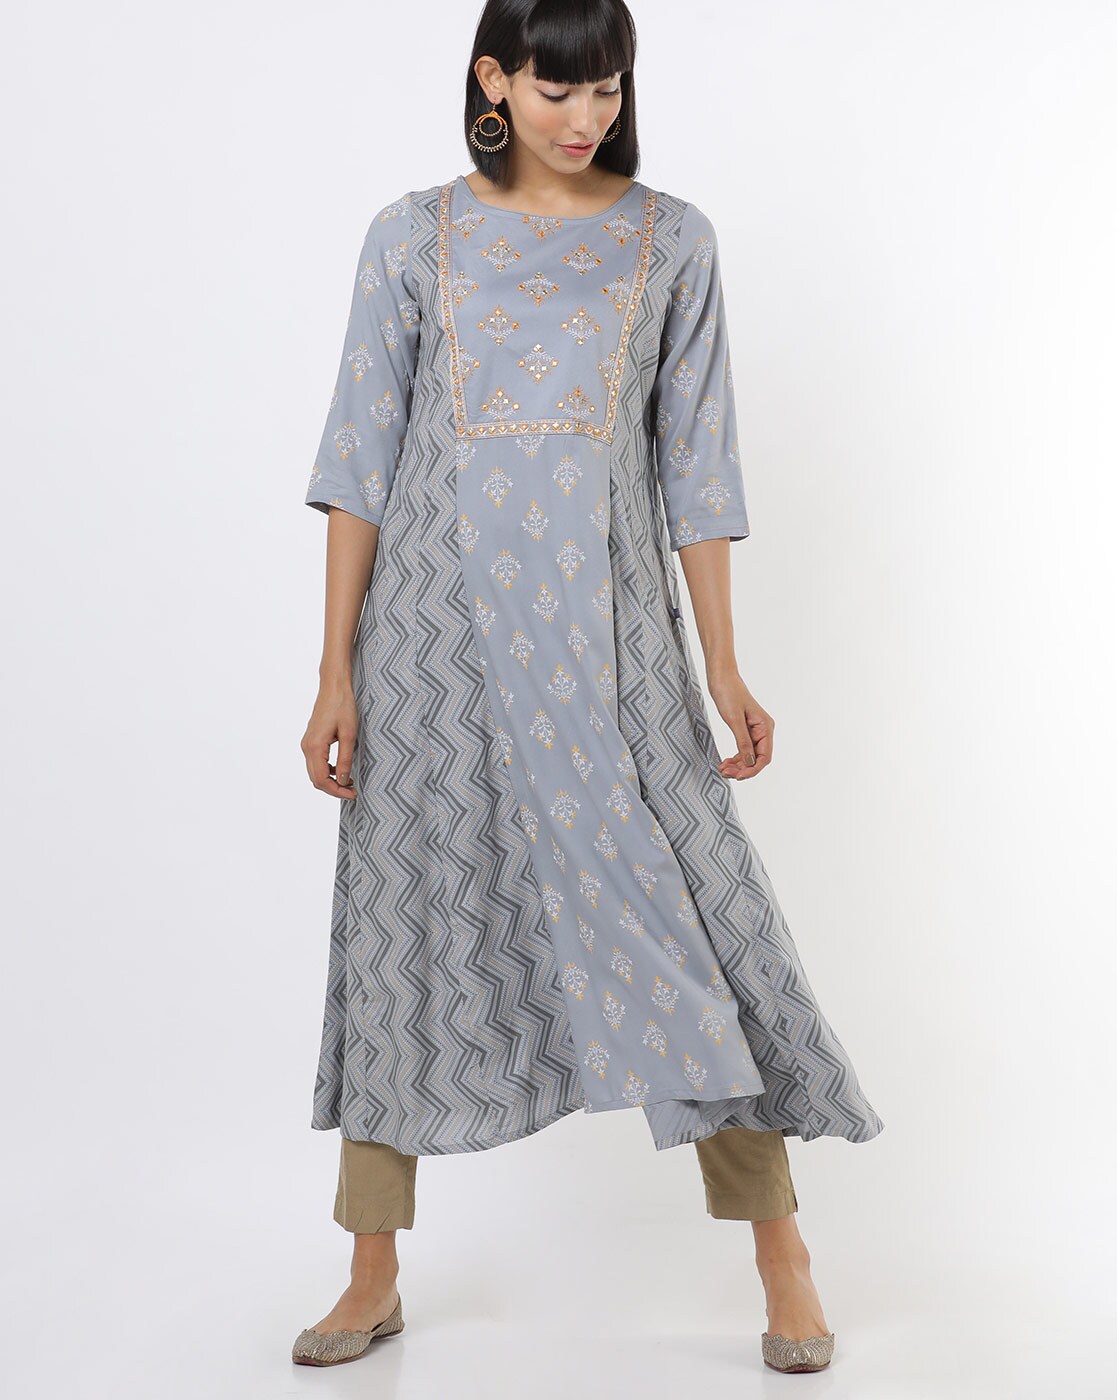 Which is the best online shop to buy anarkali kurtis? - Quora